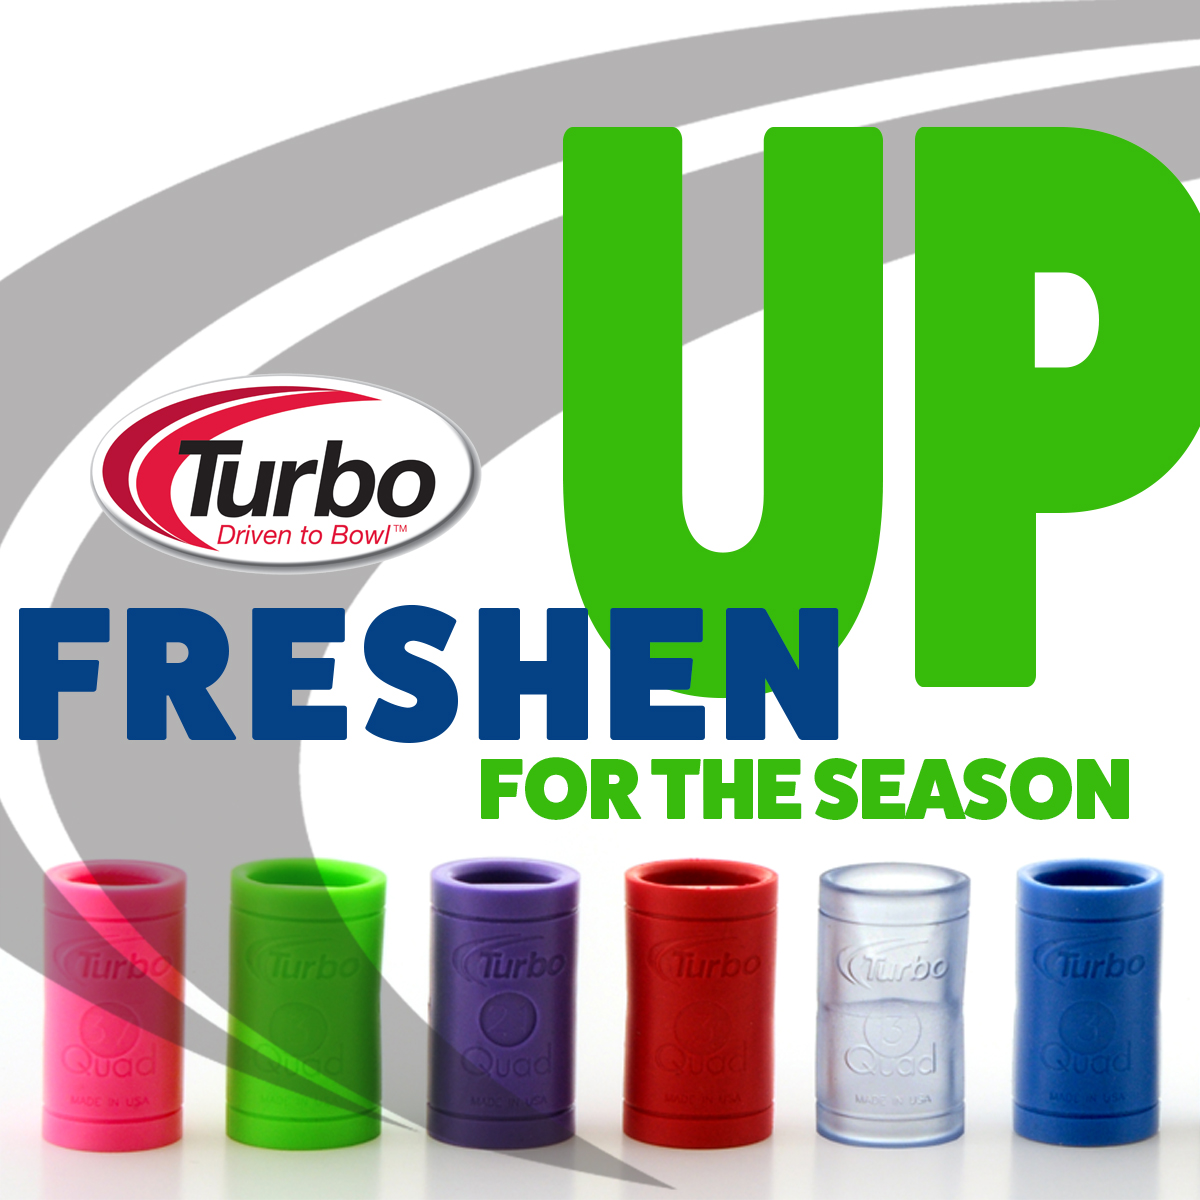 Freshen Up For The Season With Turbo Inserts!